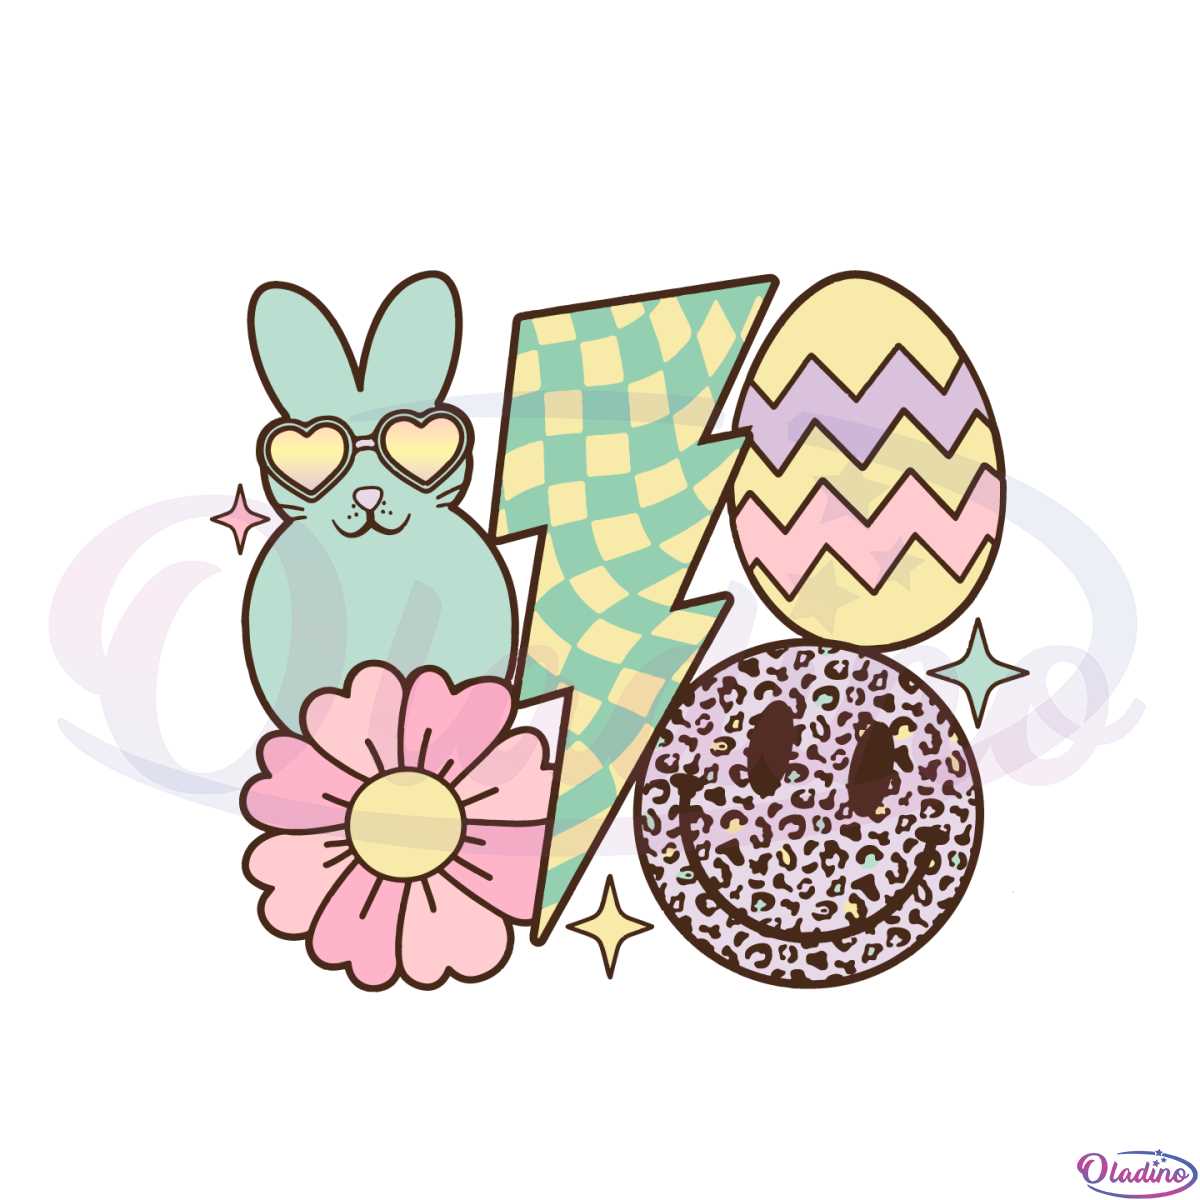 retro-easter-peeps-groovy-easter-eggs-bolt-svg-cutting-files